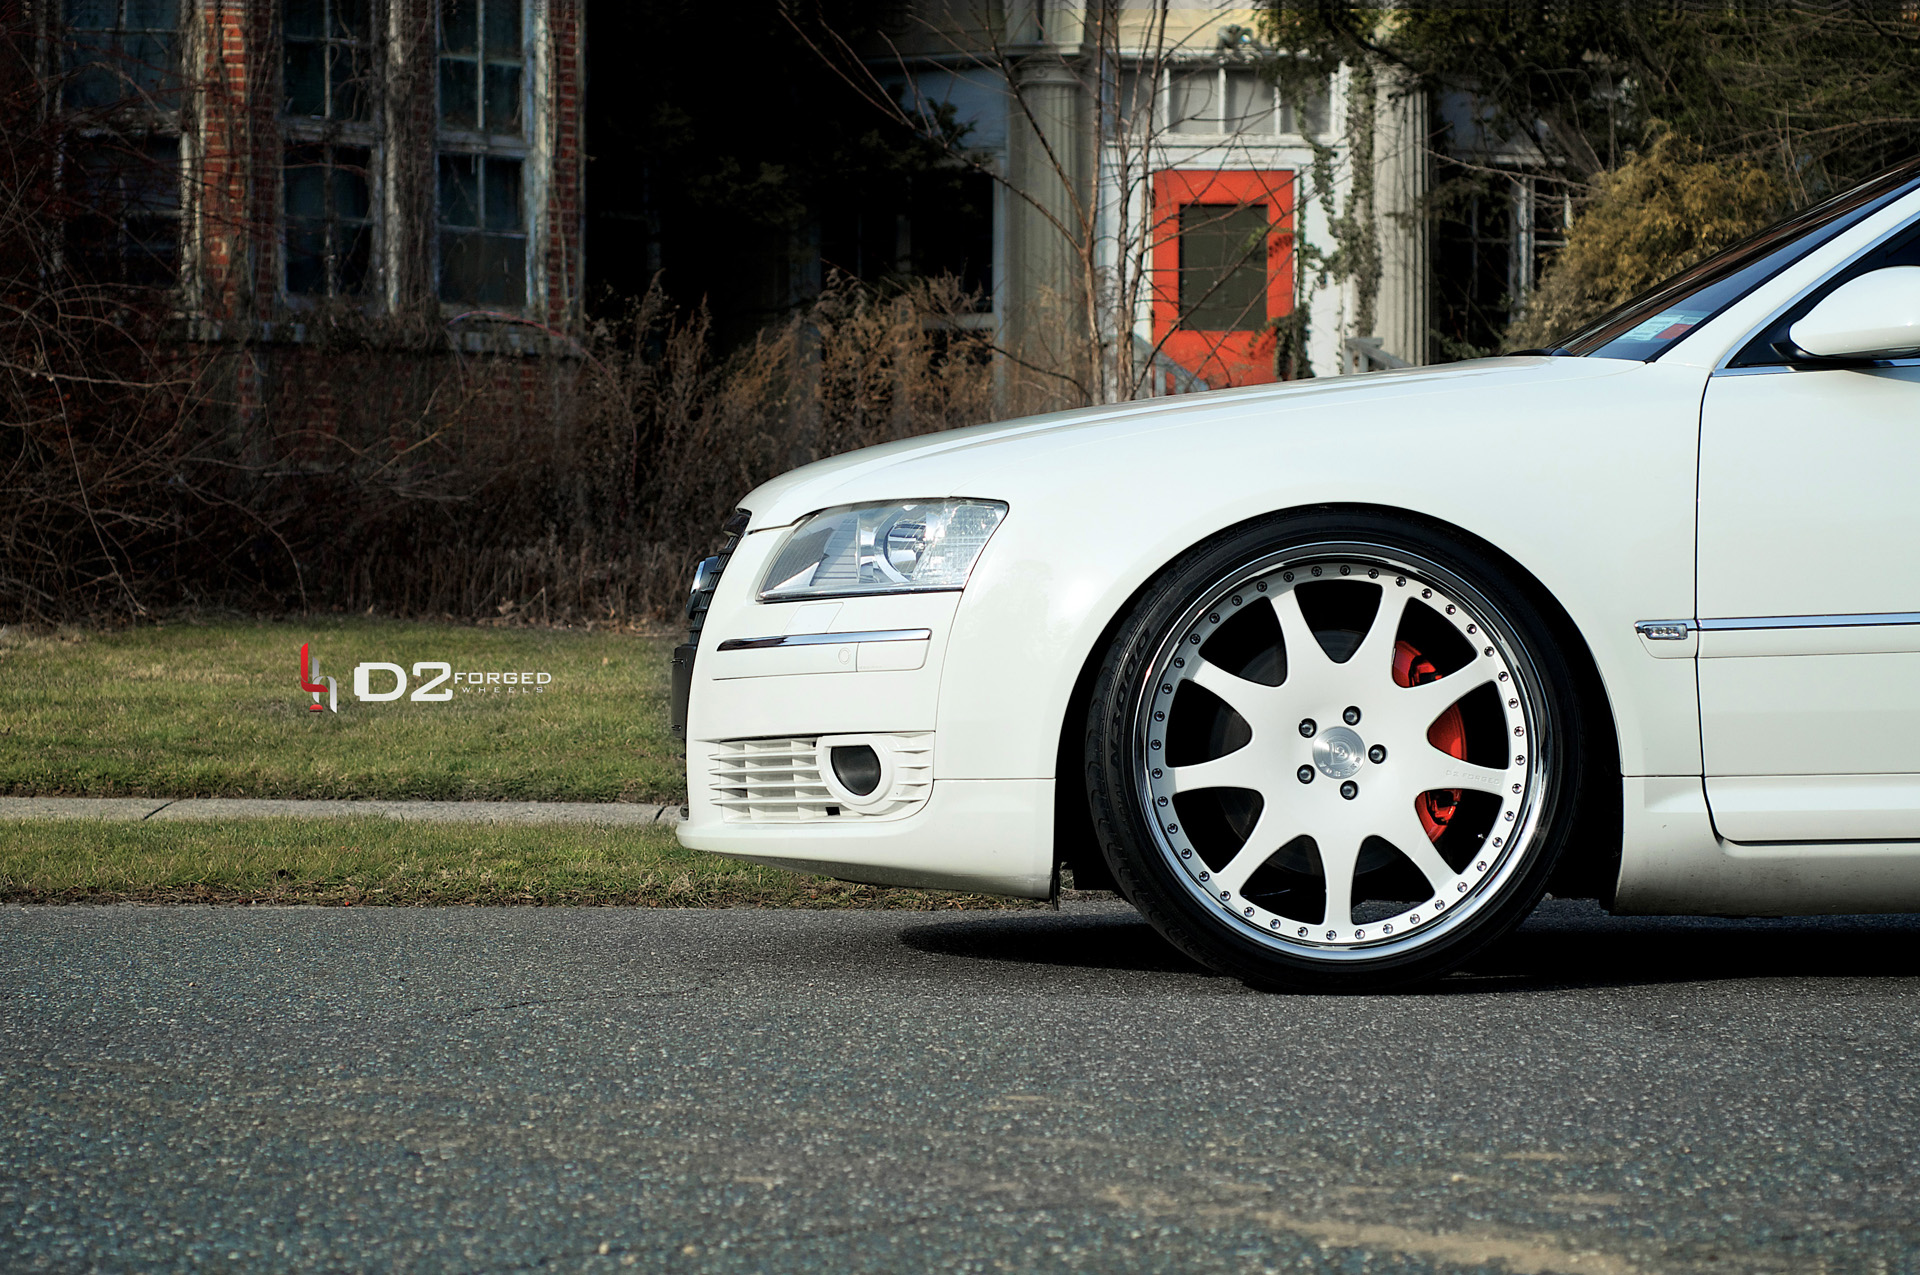 D2Forged Audi A8 VS7